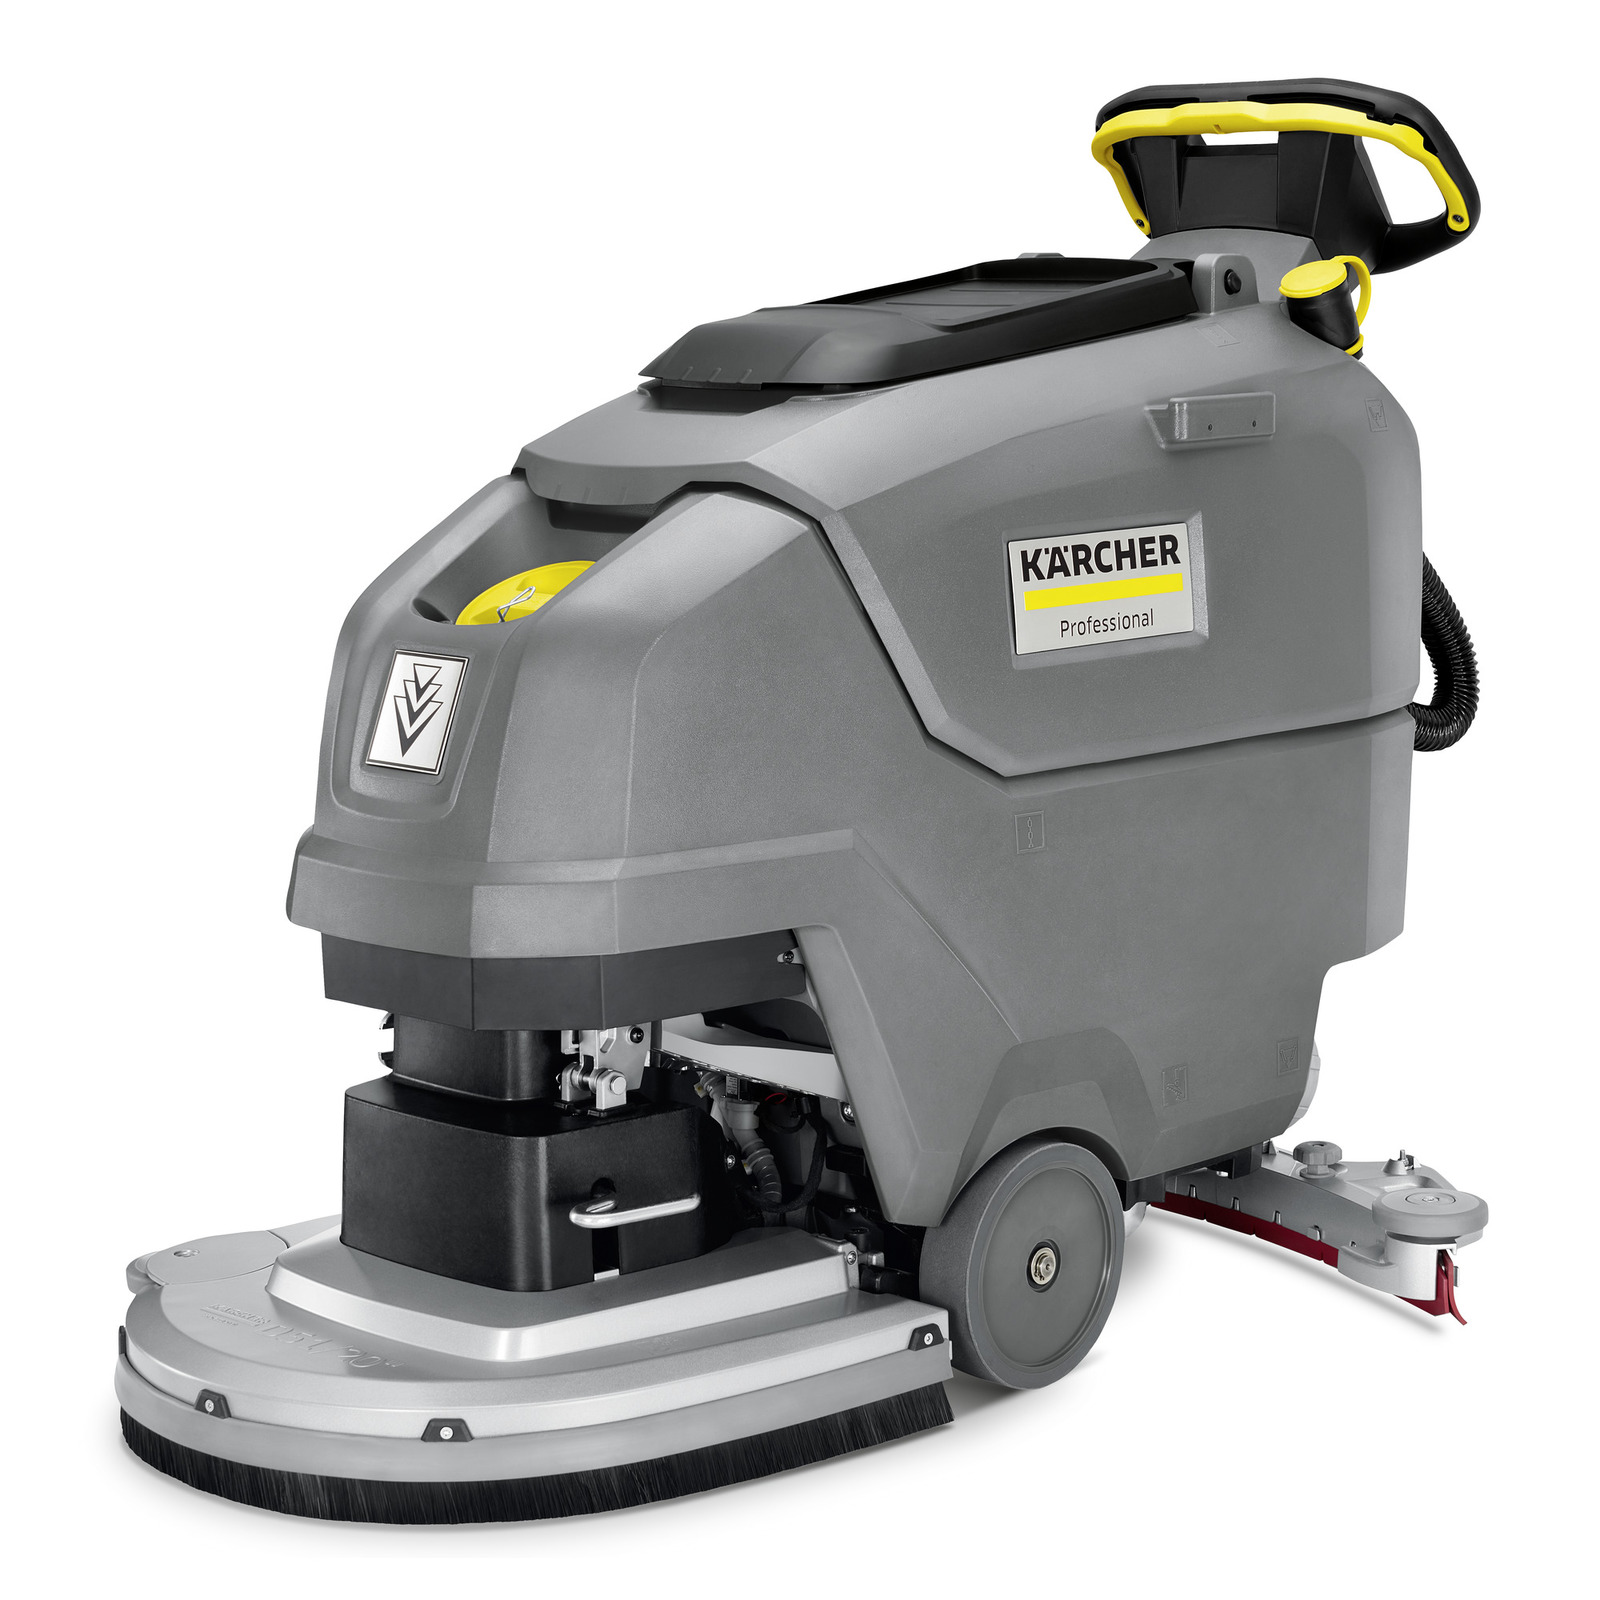 DEMO Karcher BD 50/55 W BP Classic karcher, bd, 50/50, c, classic, bp, pad, driver, commercial, automatic, floor, scrubber, auto-scrubber, walk-behind, professional, janitorial, 